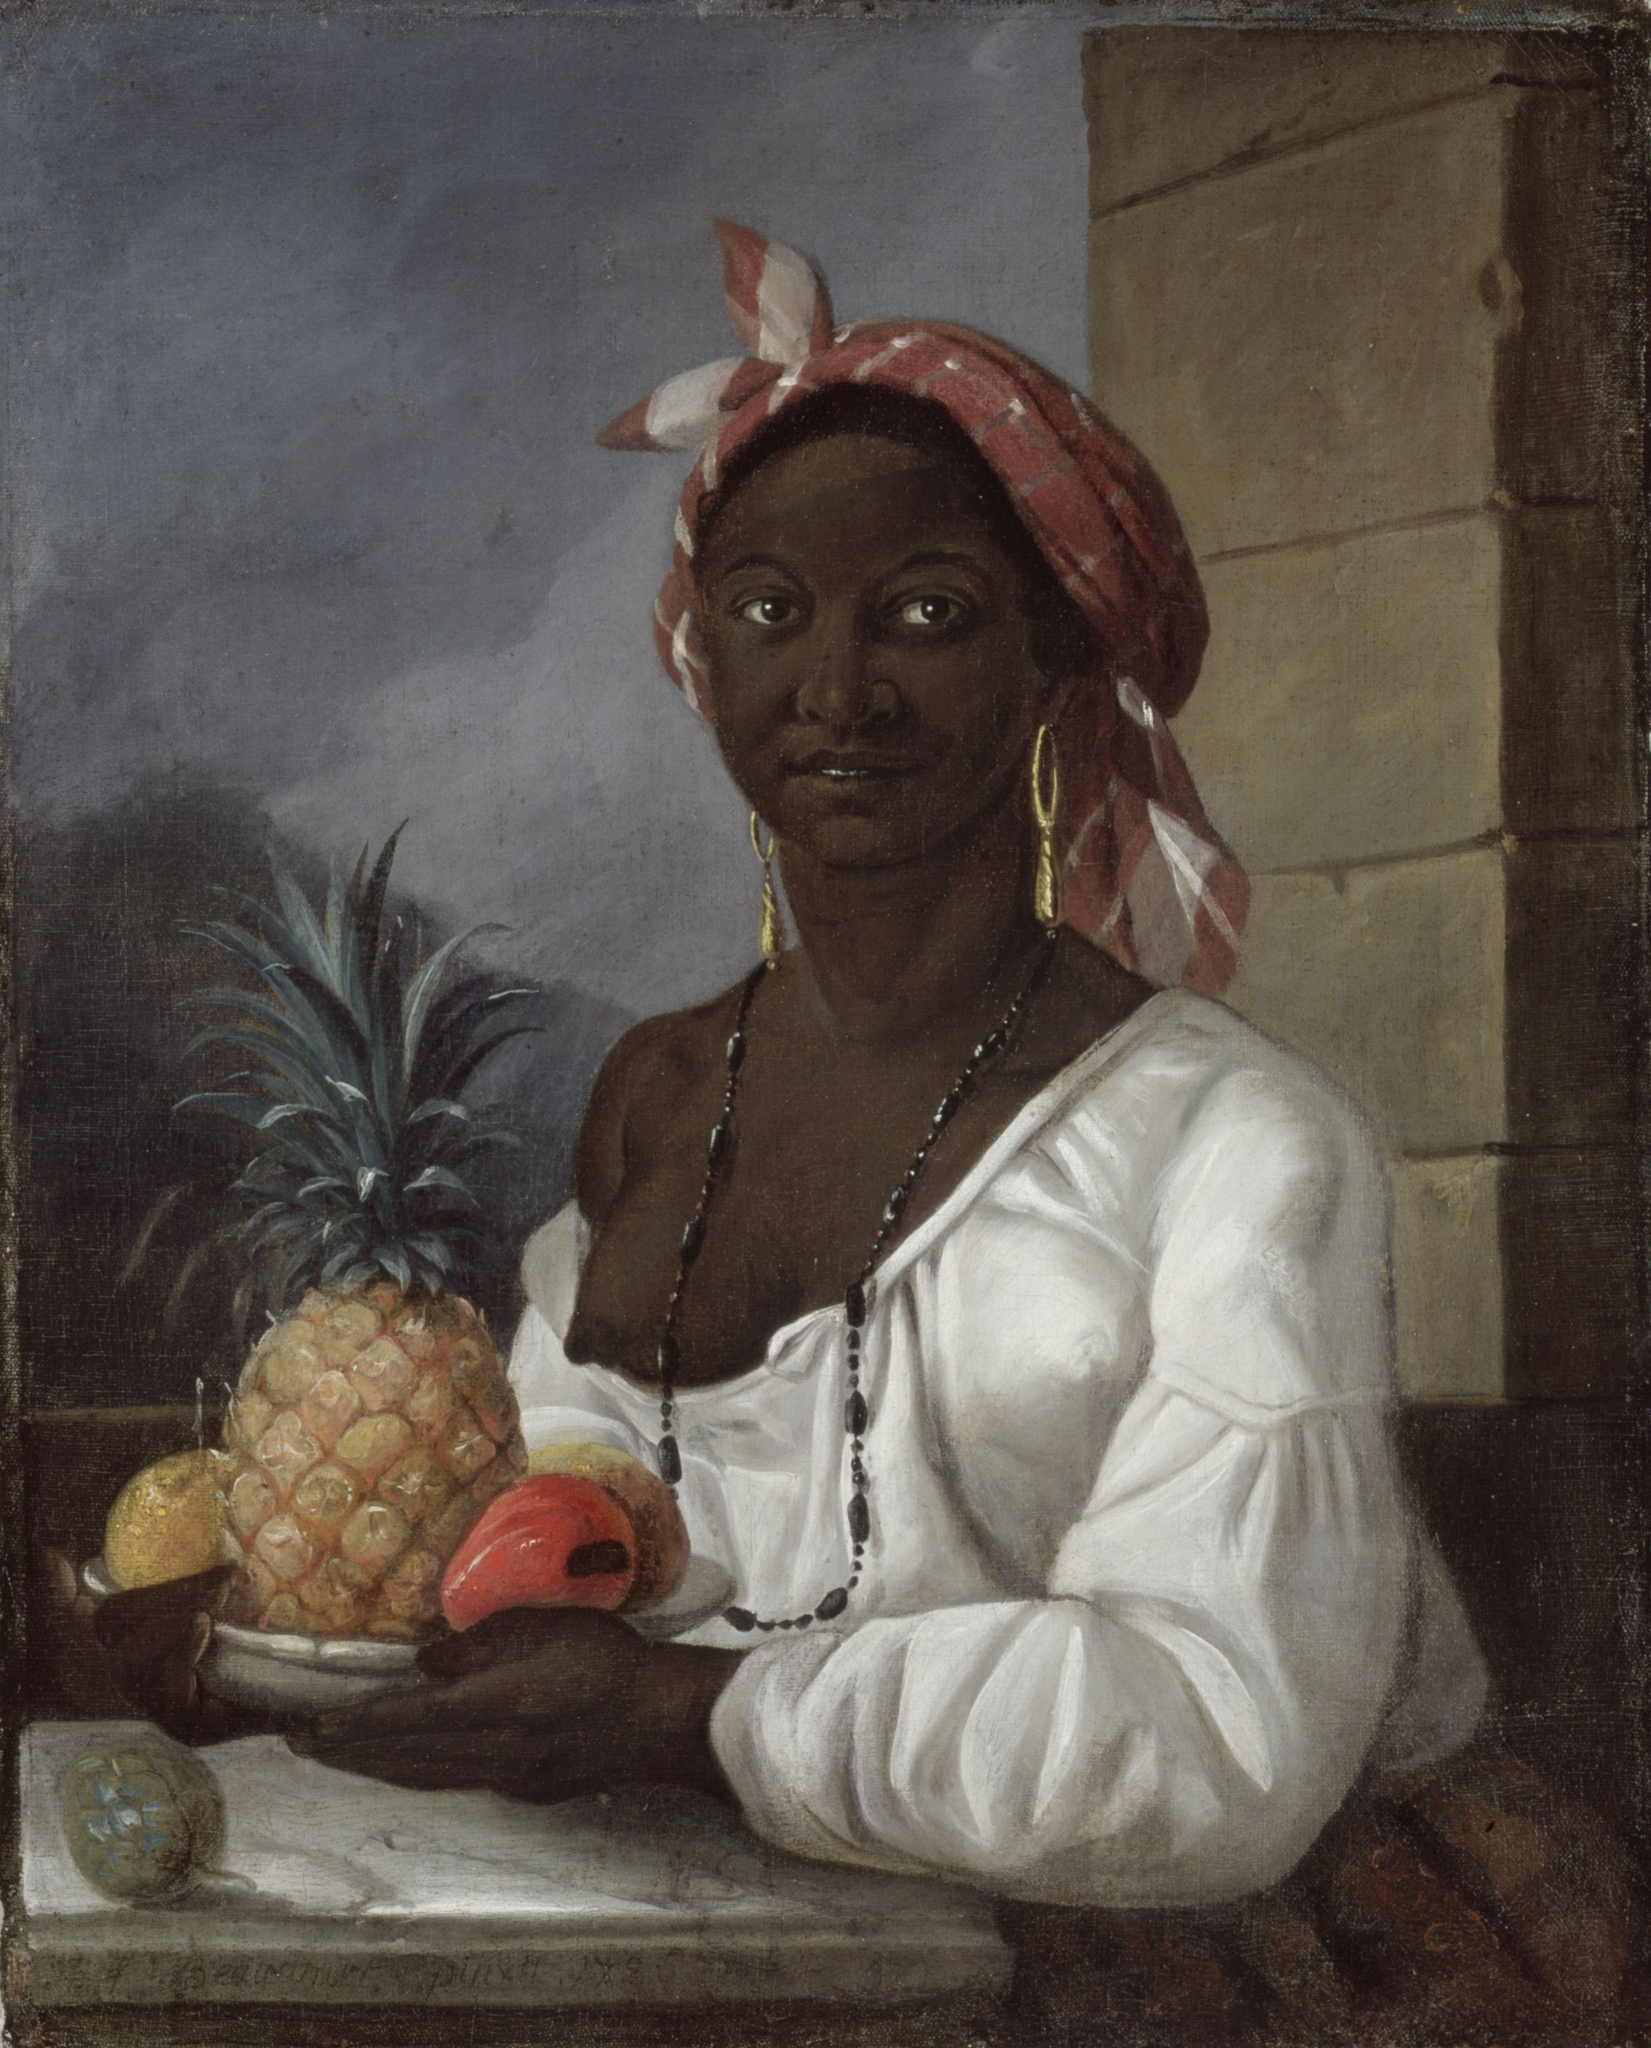 Against a background of stormy gray sky, faint hilltop, and stone wall, a young Black woman seated at a marble-topped table holds a silver bowl of tropical fruit, including a pineapple and a mango. Her loose white shirt’s large neckline droops off her right shoulder, exposing her right breast. She wears a long necklace of black beads, long gold earrings, and a muted red and white patterned headscarf. She looks just beyond the viewer’s right shoulder. We see her figure from the waist up.